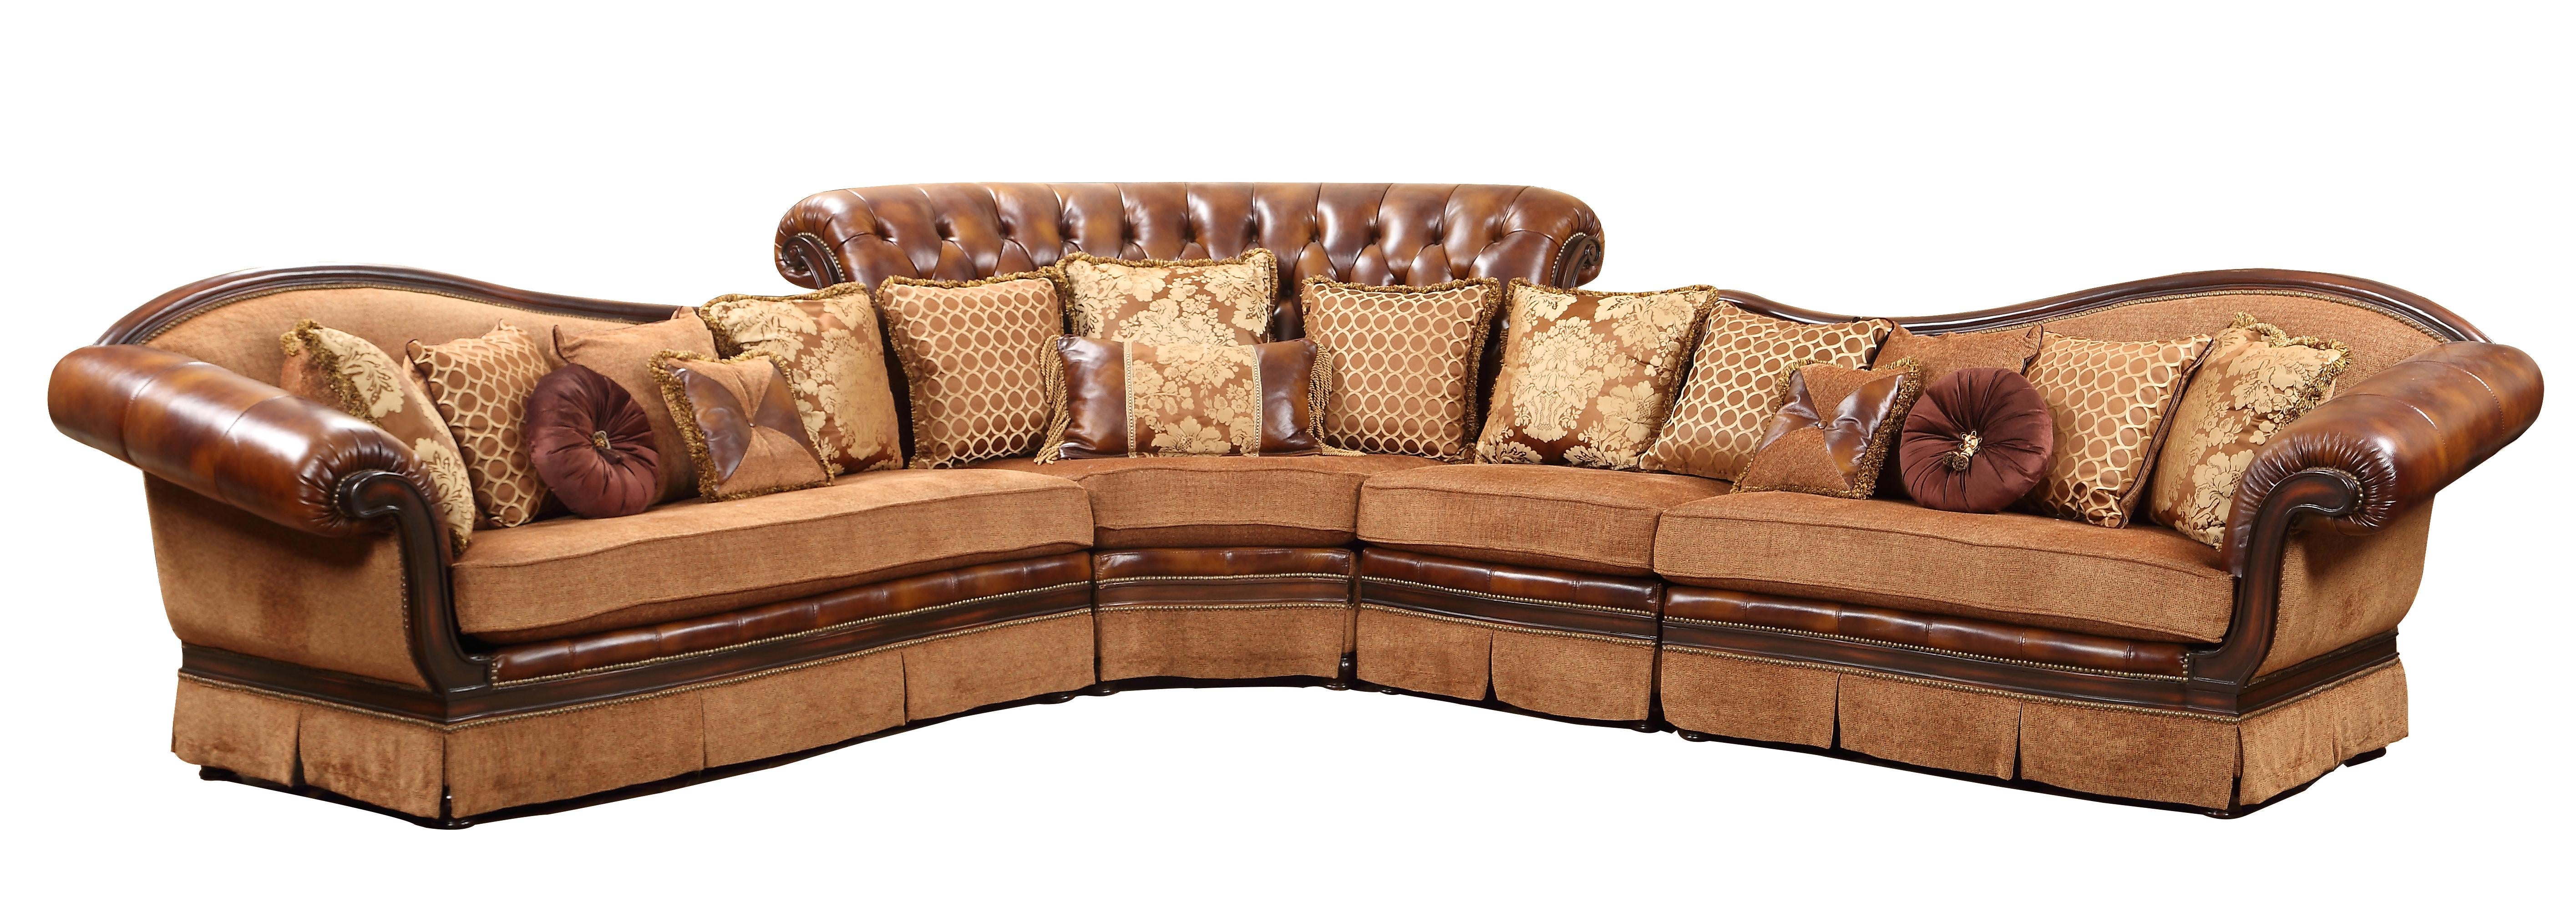 Linda Sectional Traditional Style